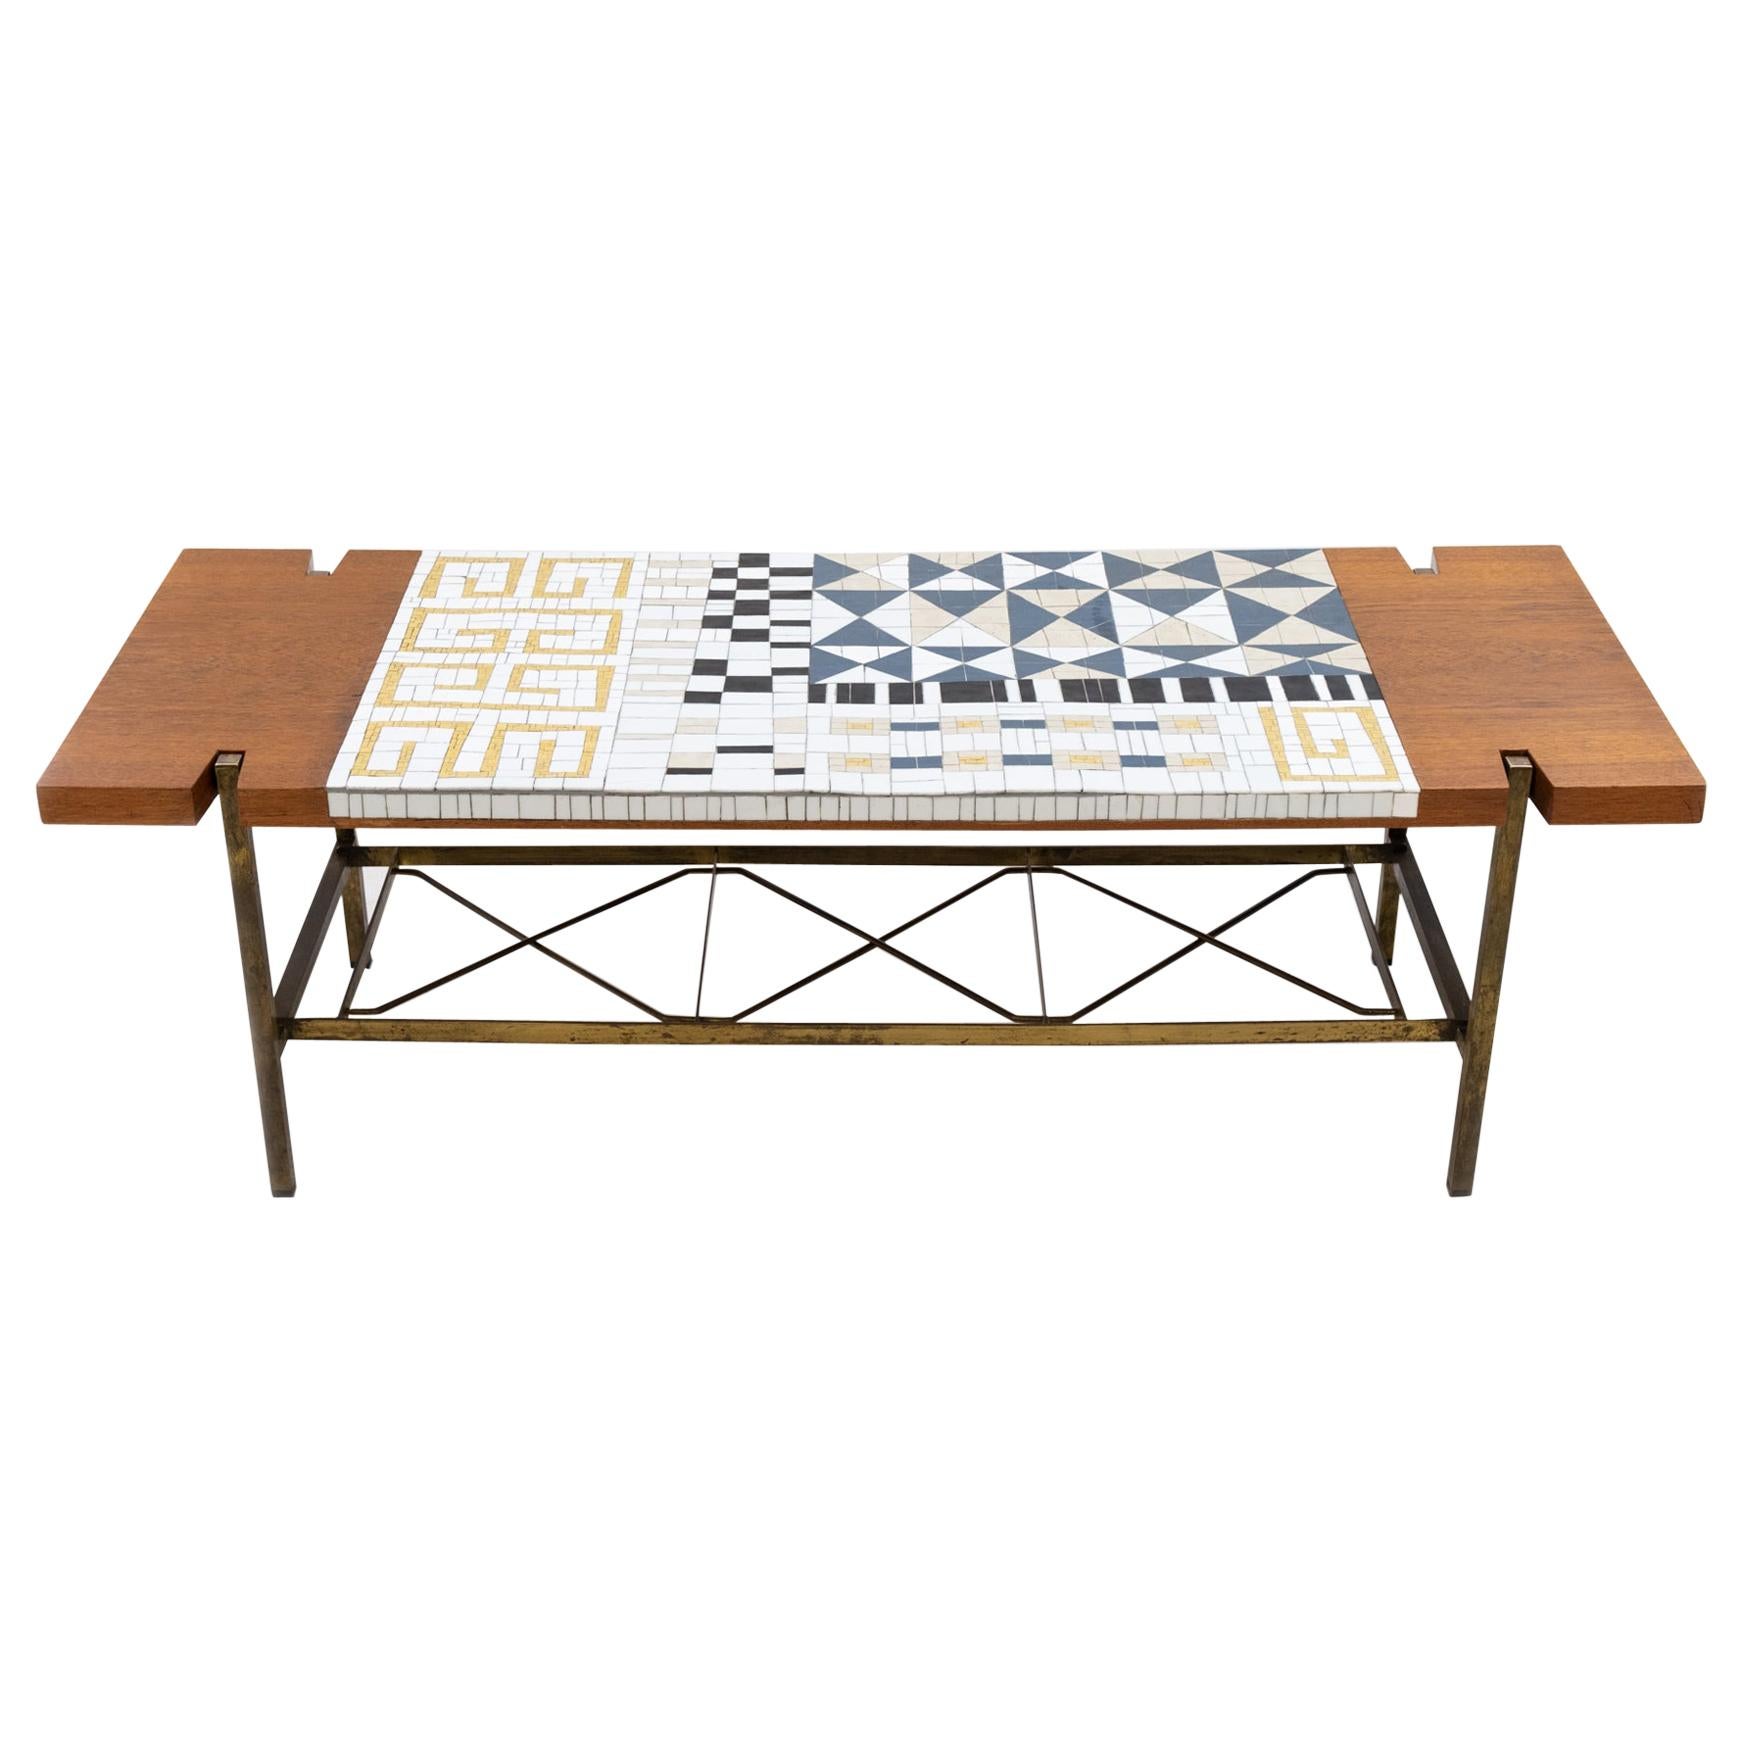 Mosaic Tile and Teak Coffee Table, 1950s